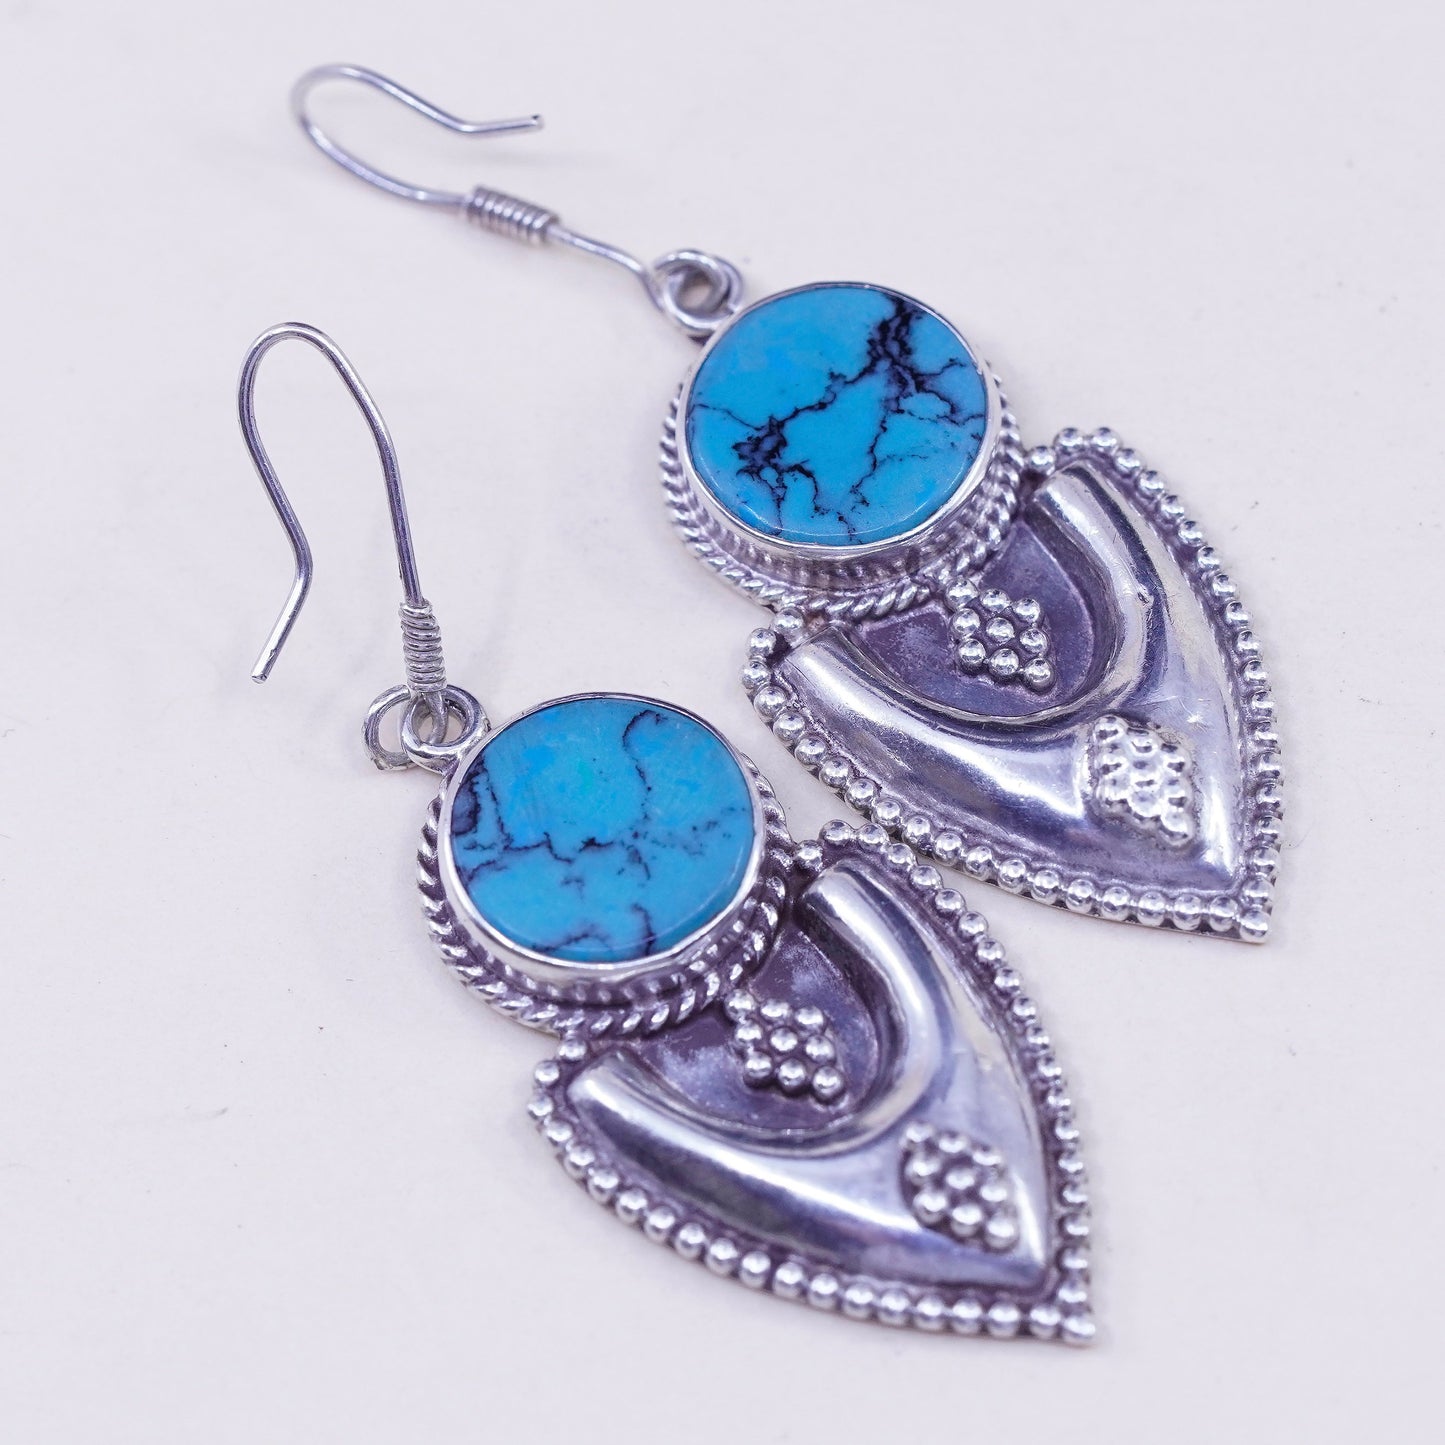 Vintage Sterling 925 silver handmade earrings, with round turquoise and beads